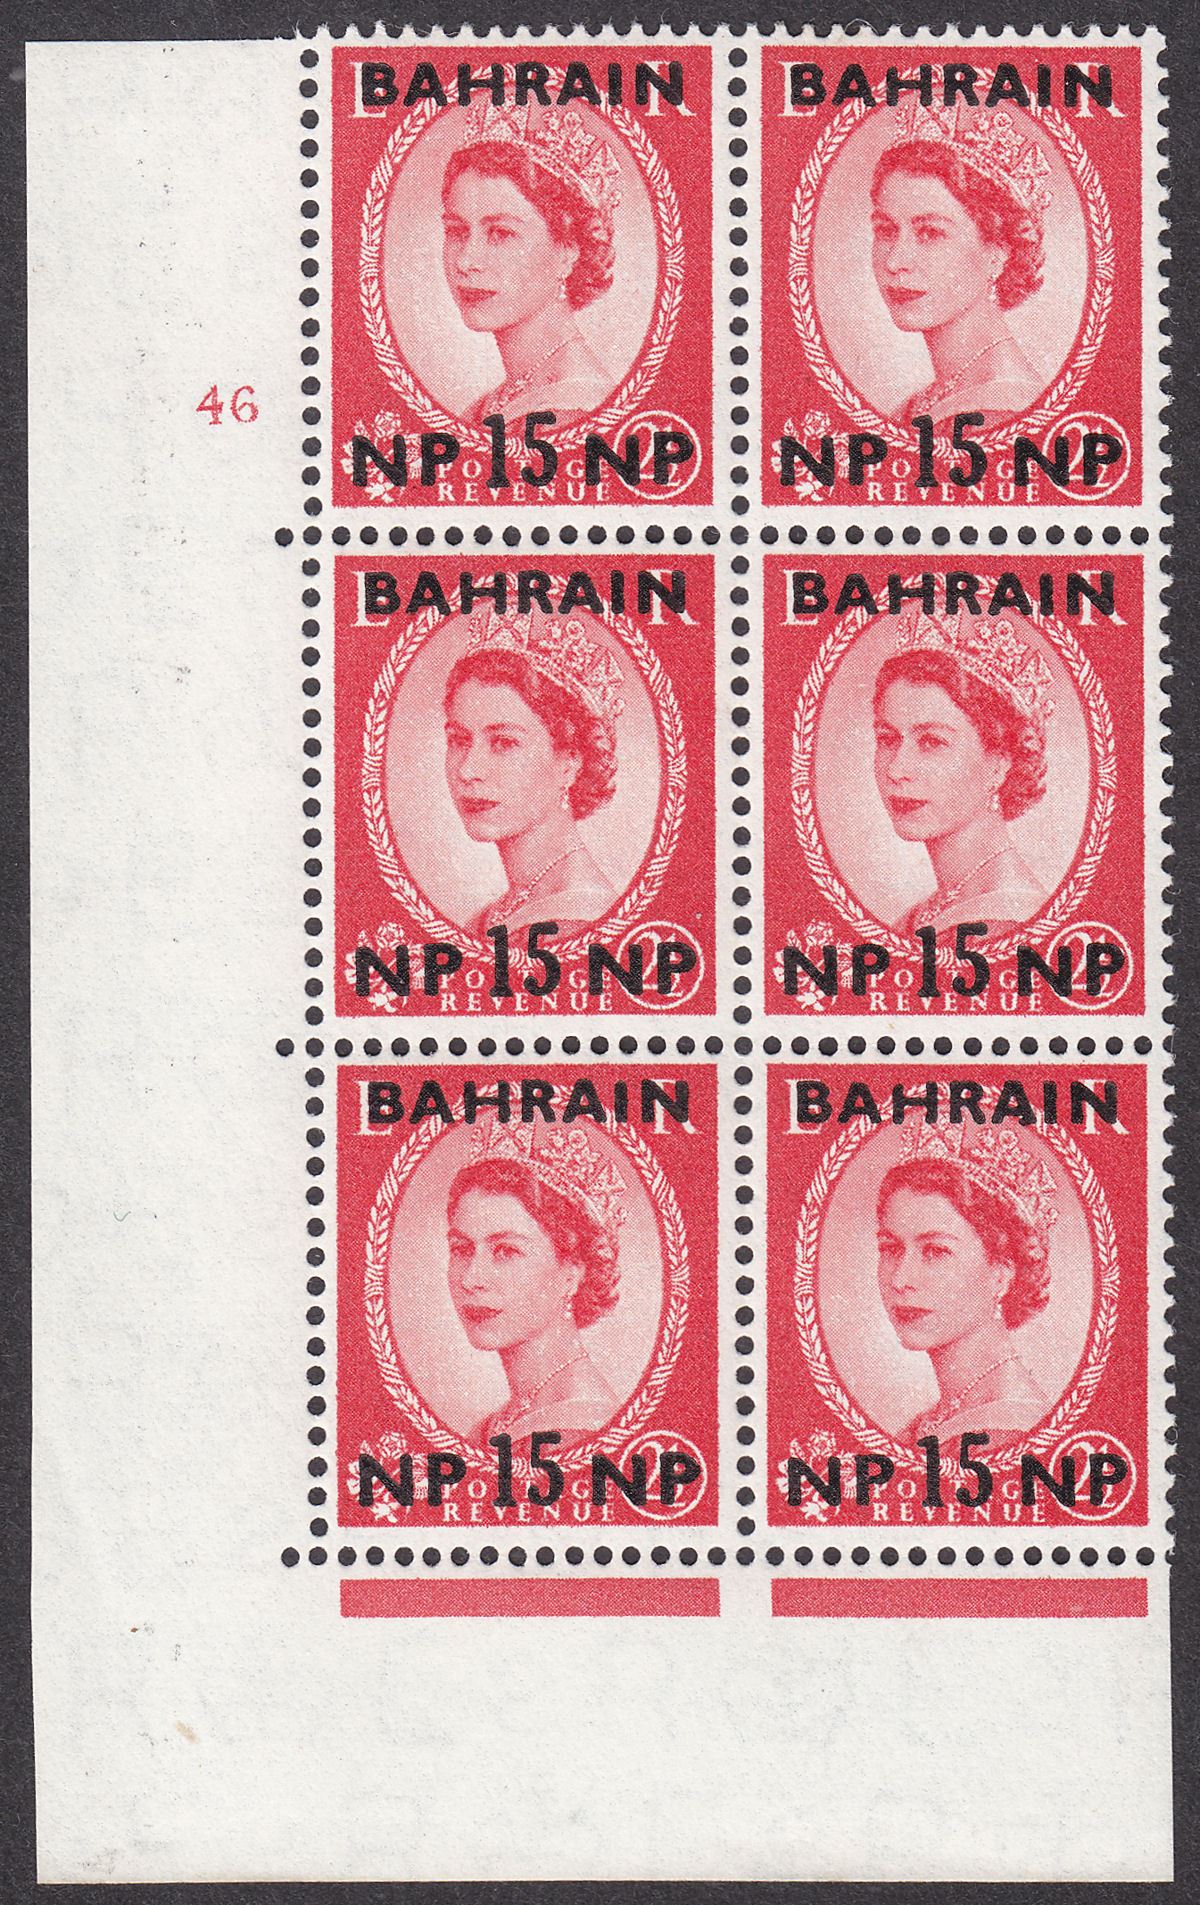 Bahrain 1959 QEII 15np Surcharge on 2½d Block of 6 with Varieties Mint Short H